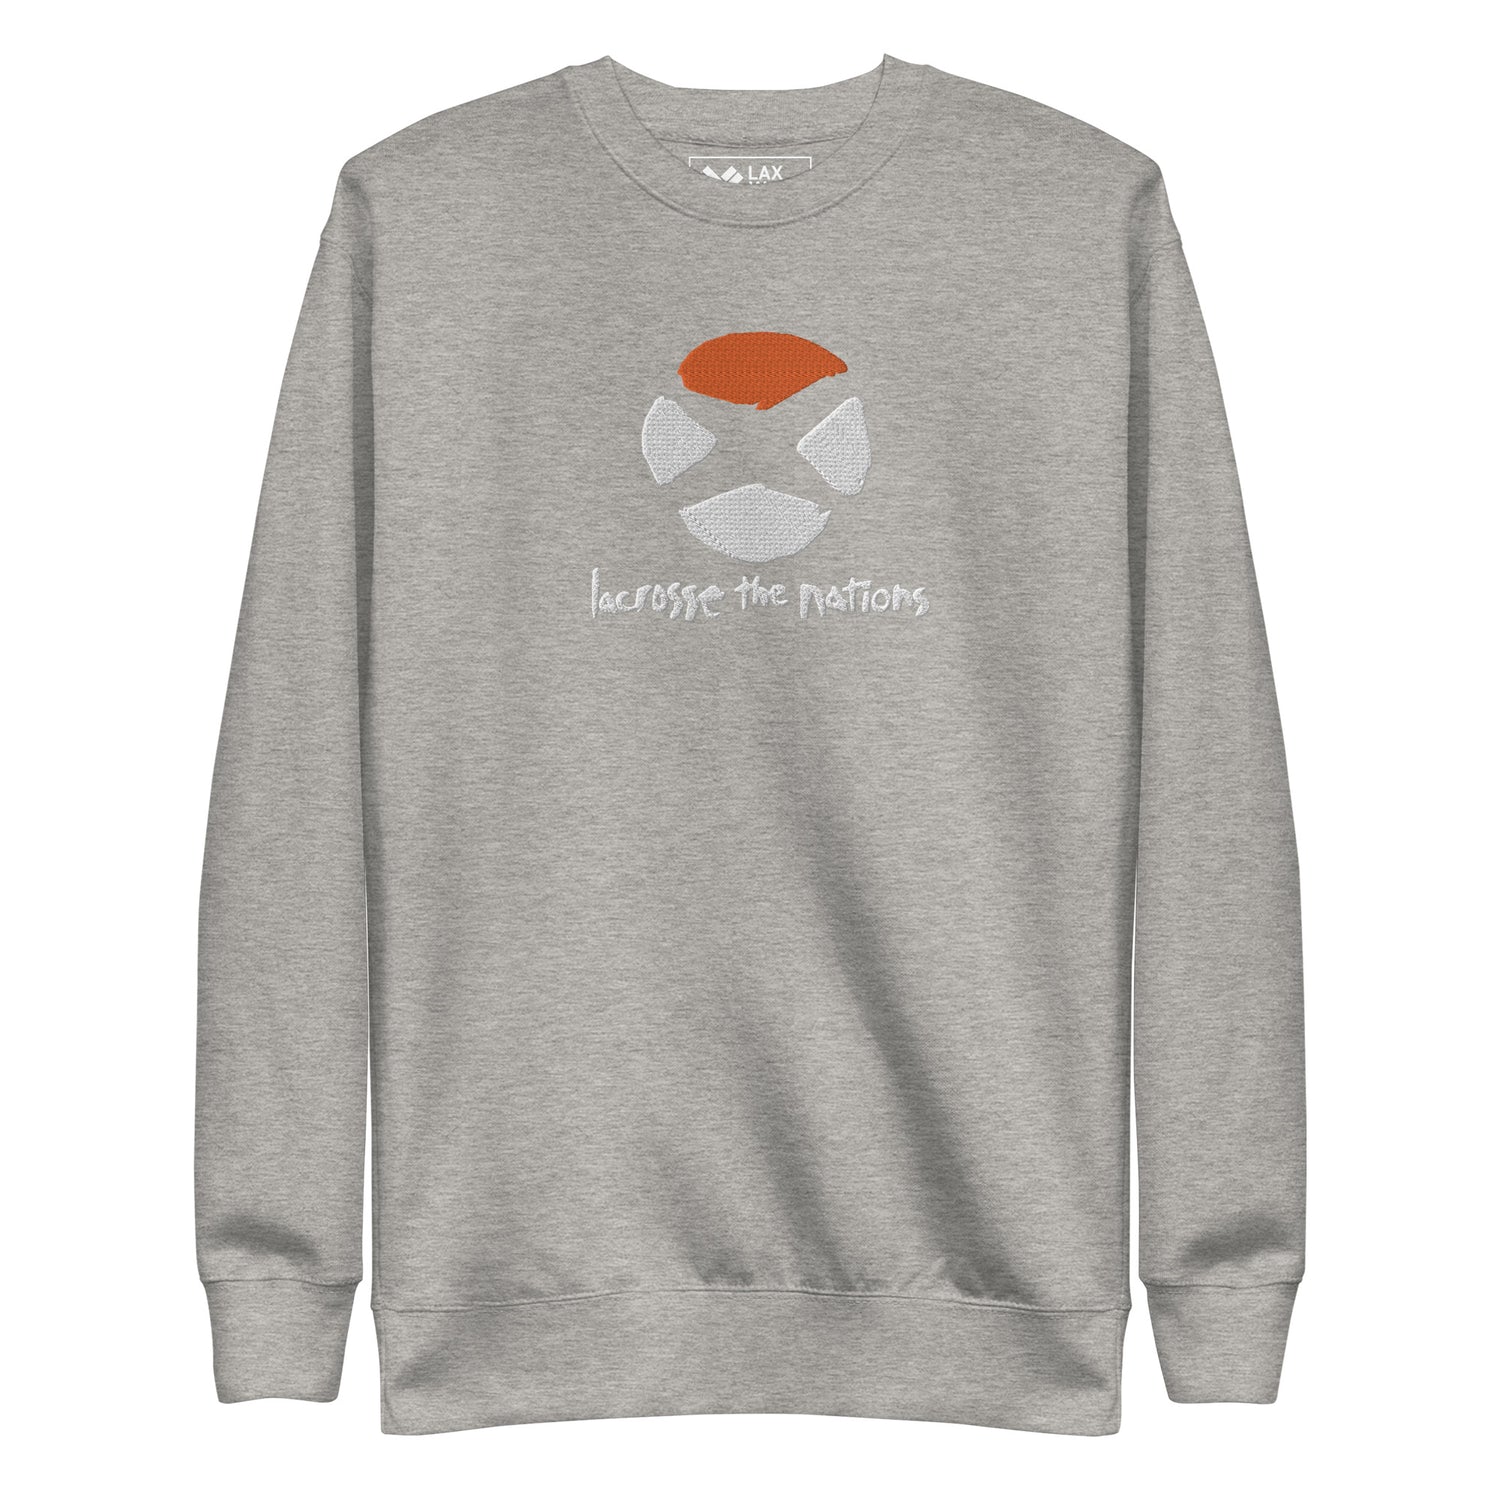 LAX World for Lacrosse The Nations - Embroidered Logo Crewneck